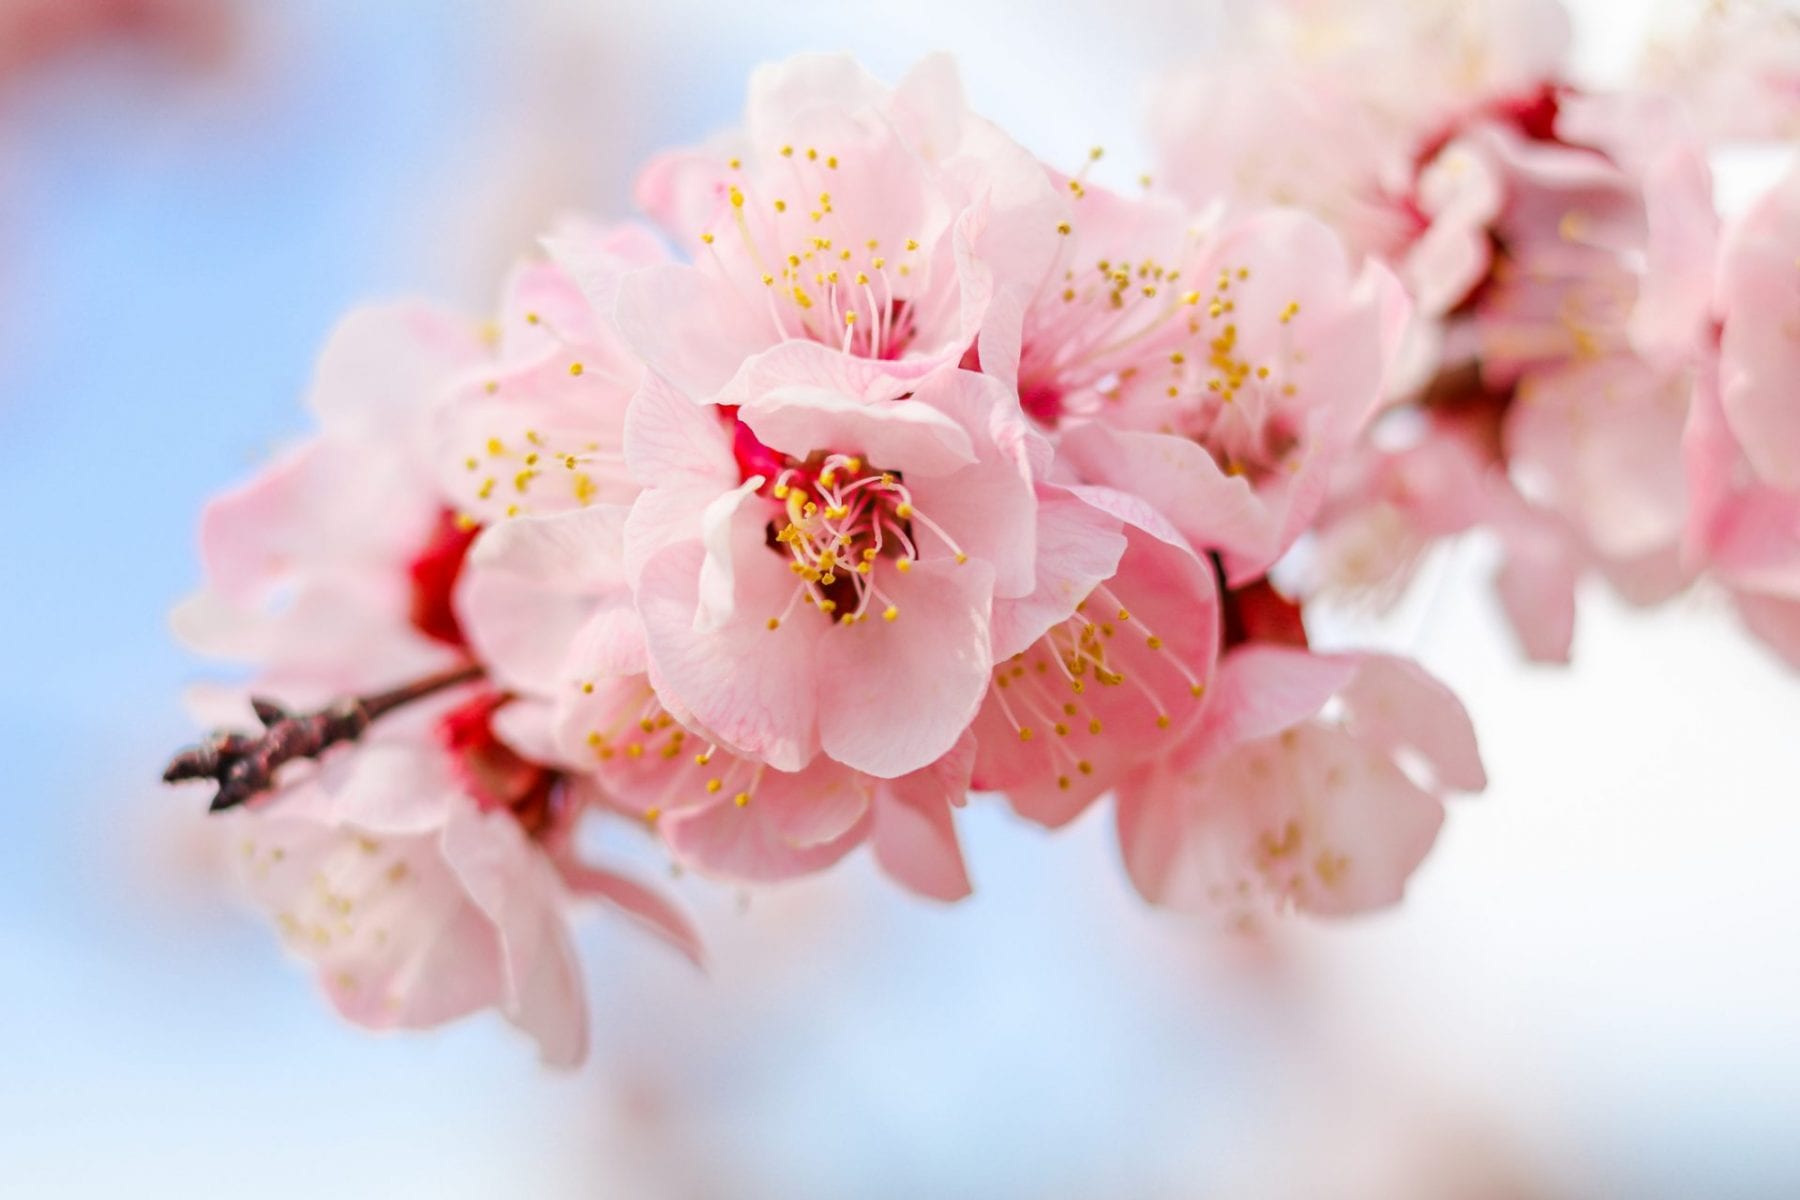 Here's where you should be travelling to for the cherry blossom season ...